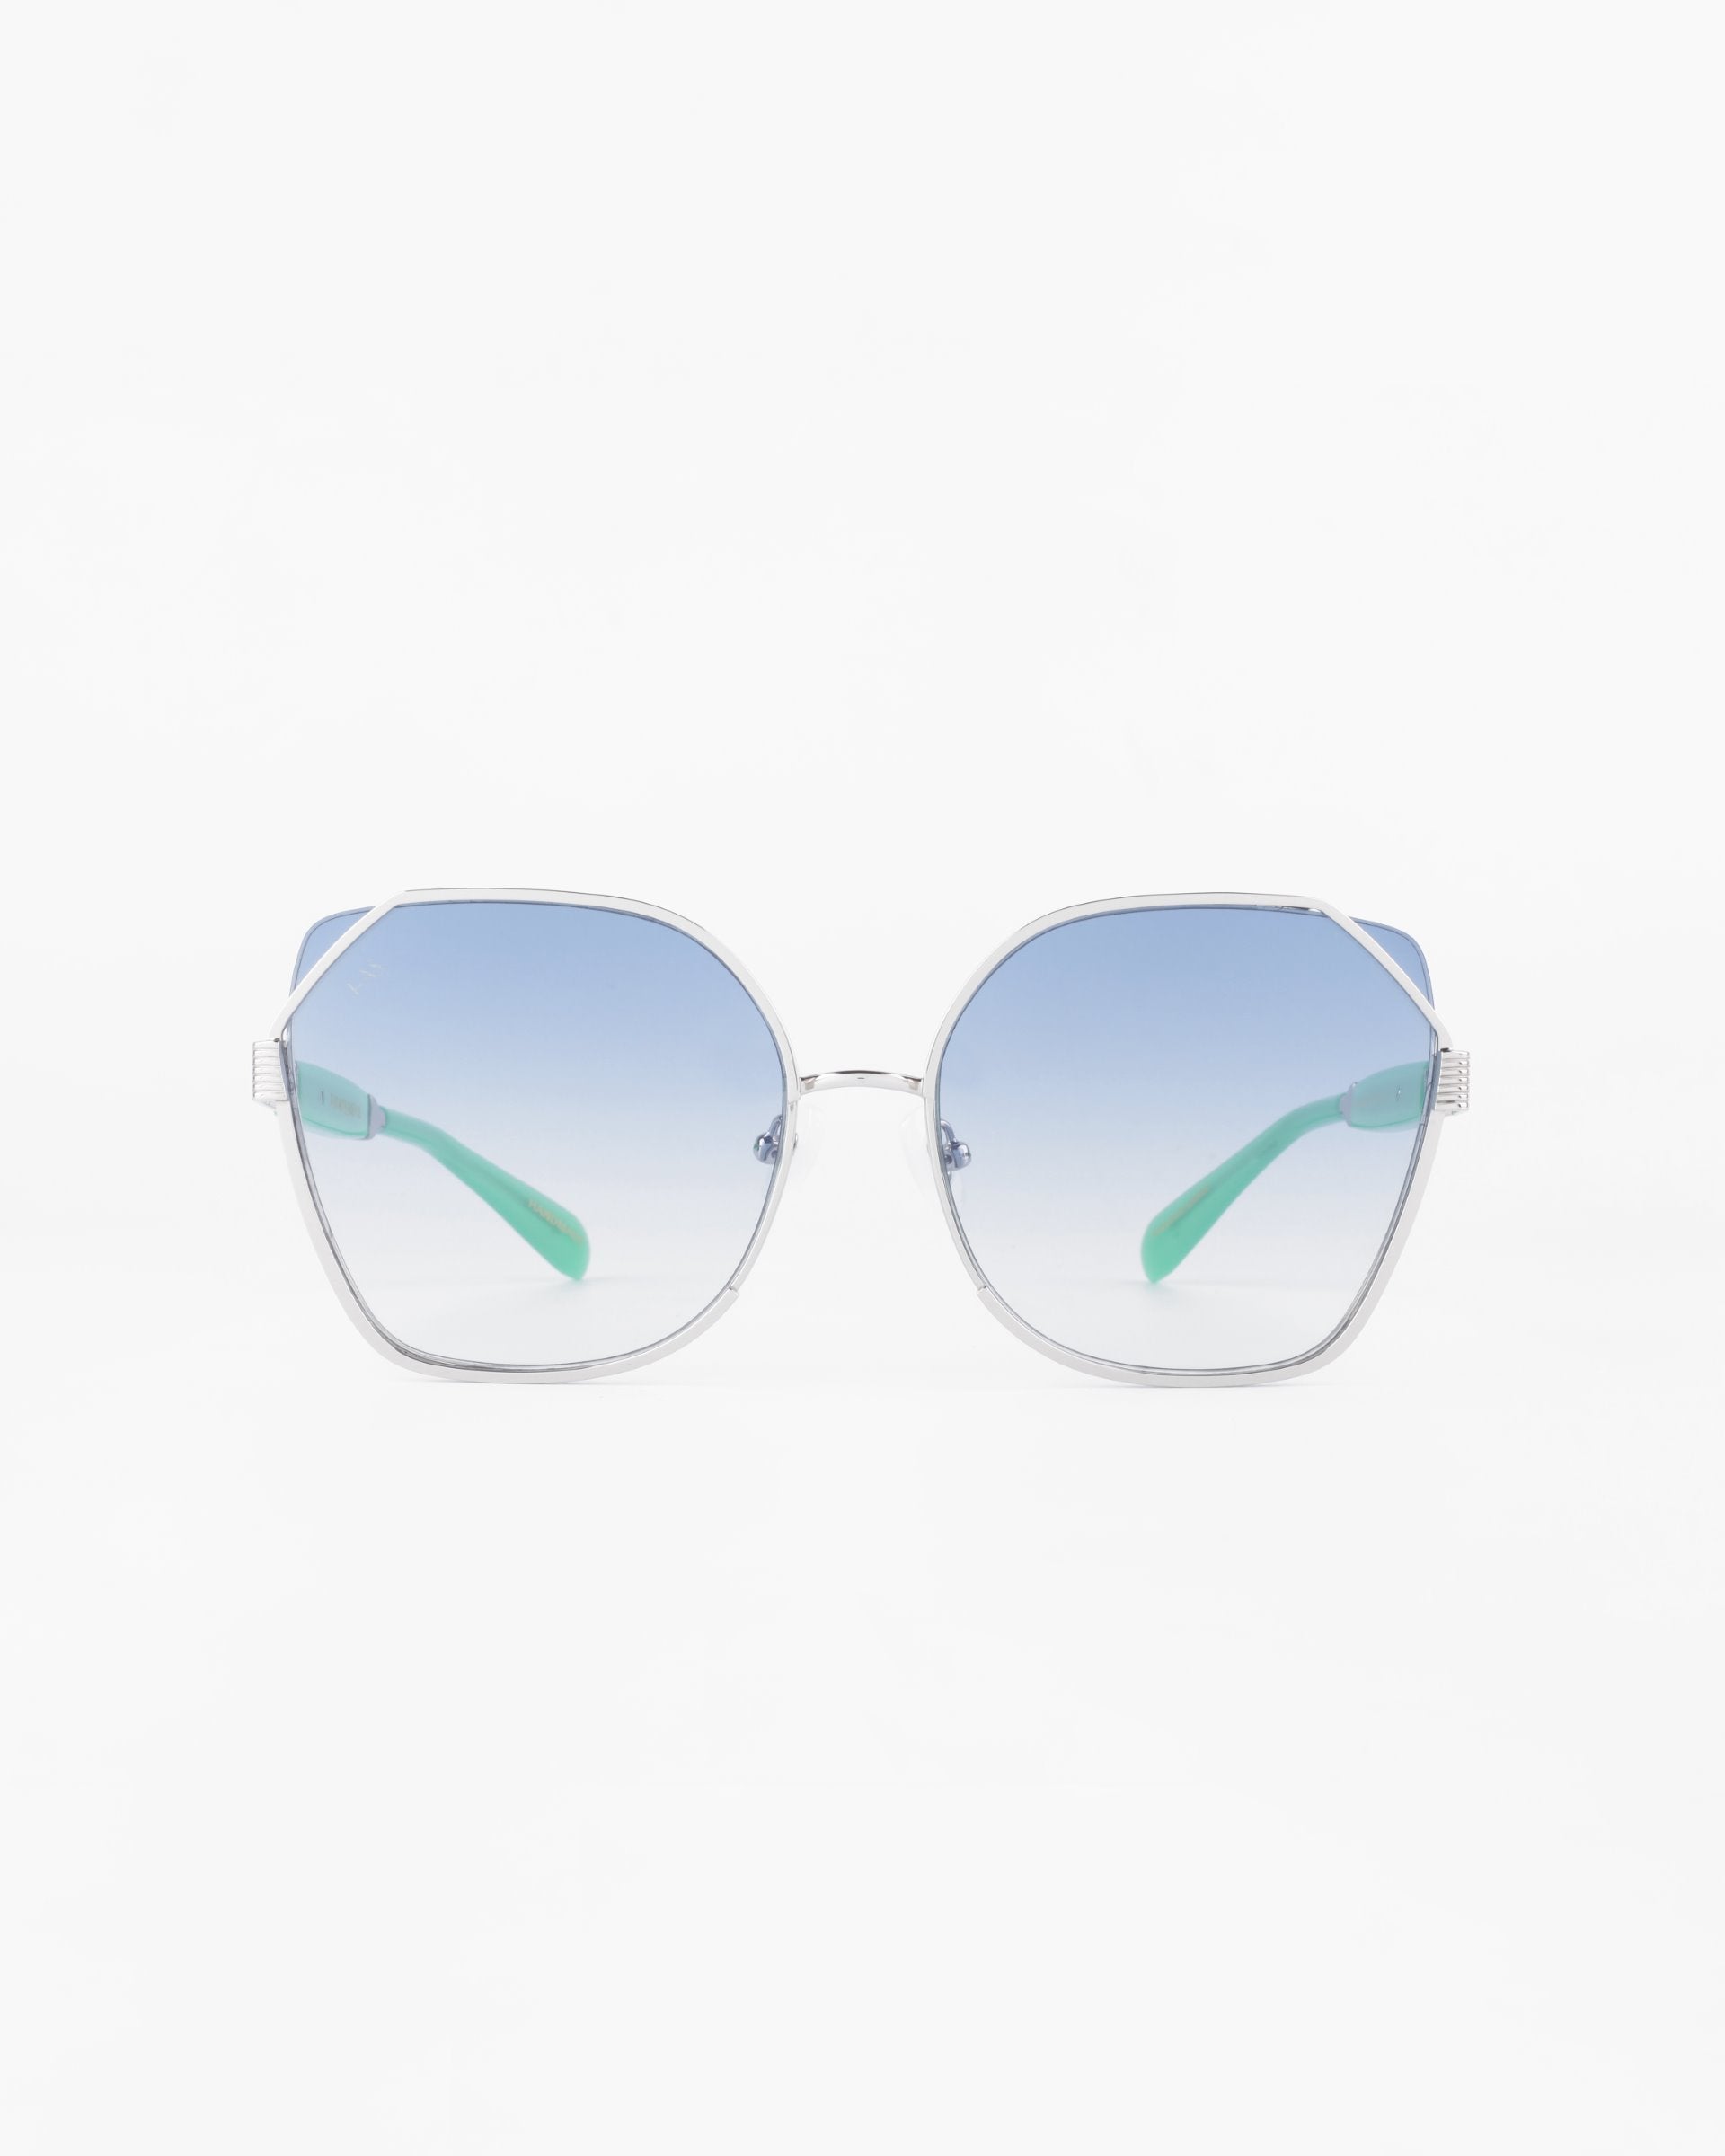 A pair of stylish sunglasses with large, hexagonal frames featuring a gold-plated stainless steel finish. The ultra-lightweight nylon lenses are gradient blue, transitioning from a darker hue at the top to a lighter shade at the bottom. The arms have a modern, sleek design with light green accents and provide 100% UVA &amp; UVB protection. Introducing Montage by For Art&#39;s Sake®.